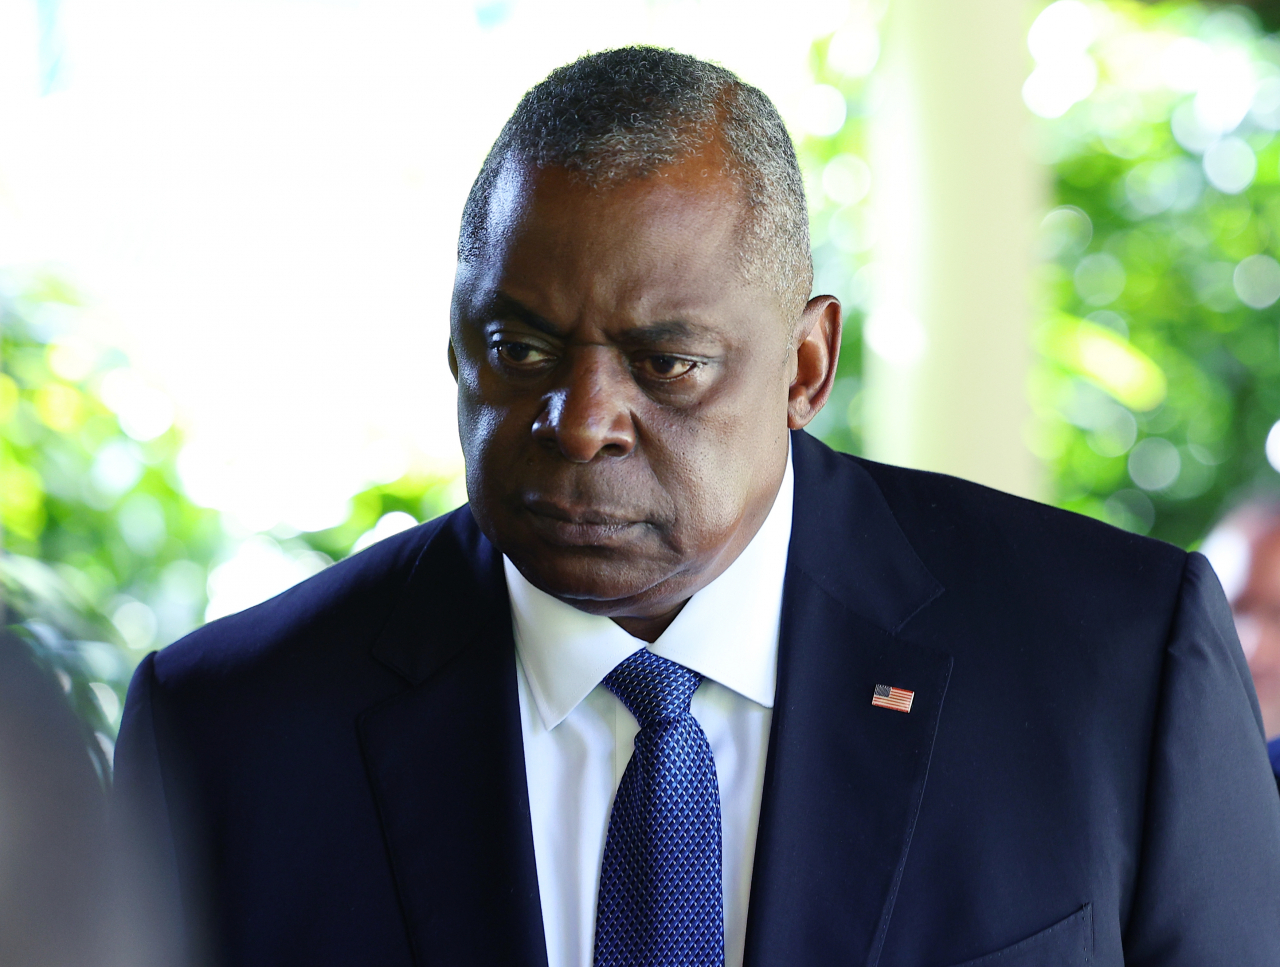 US Secretary of Defense Lloyd Austin attends 20th International Institute for Strategic Studies Shangri-La Dialogue, Asia's annual defense and security forum, in Singapore, Friday. (Yonhap)